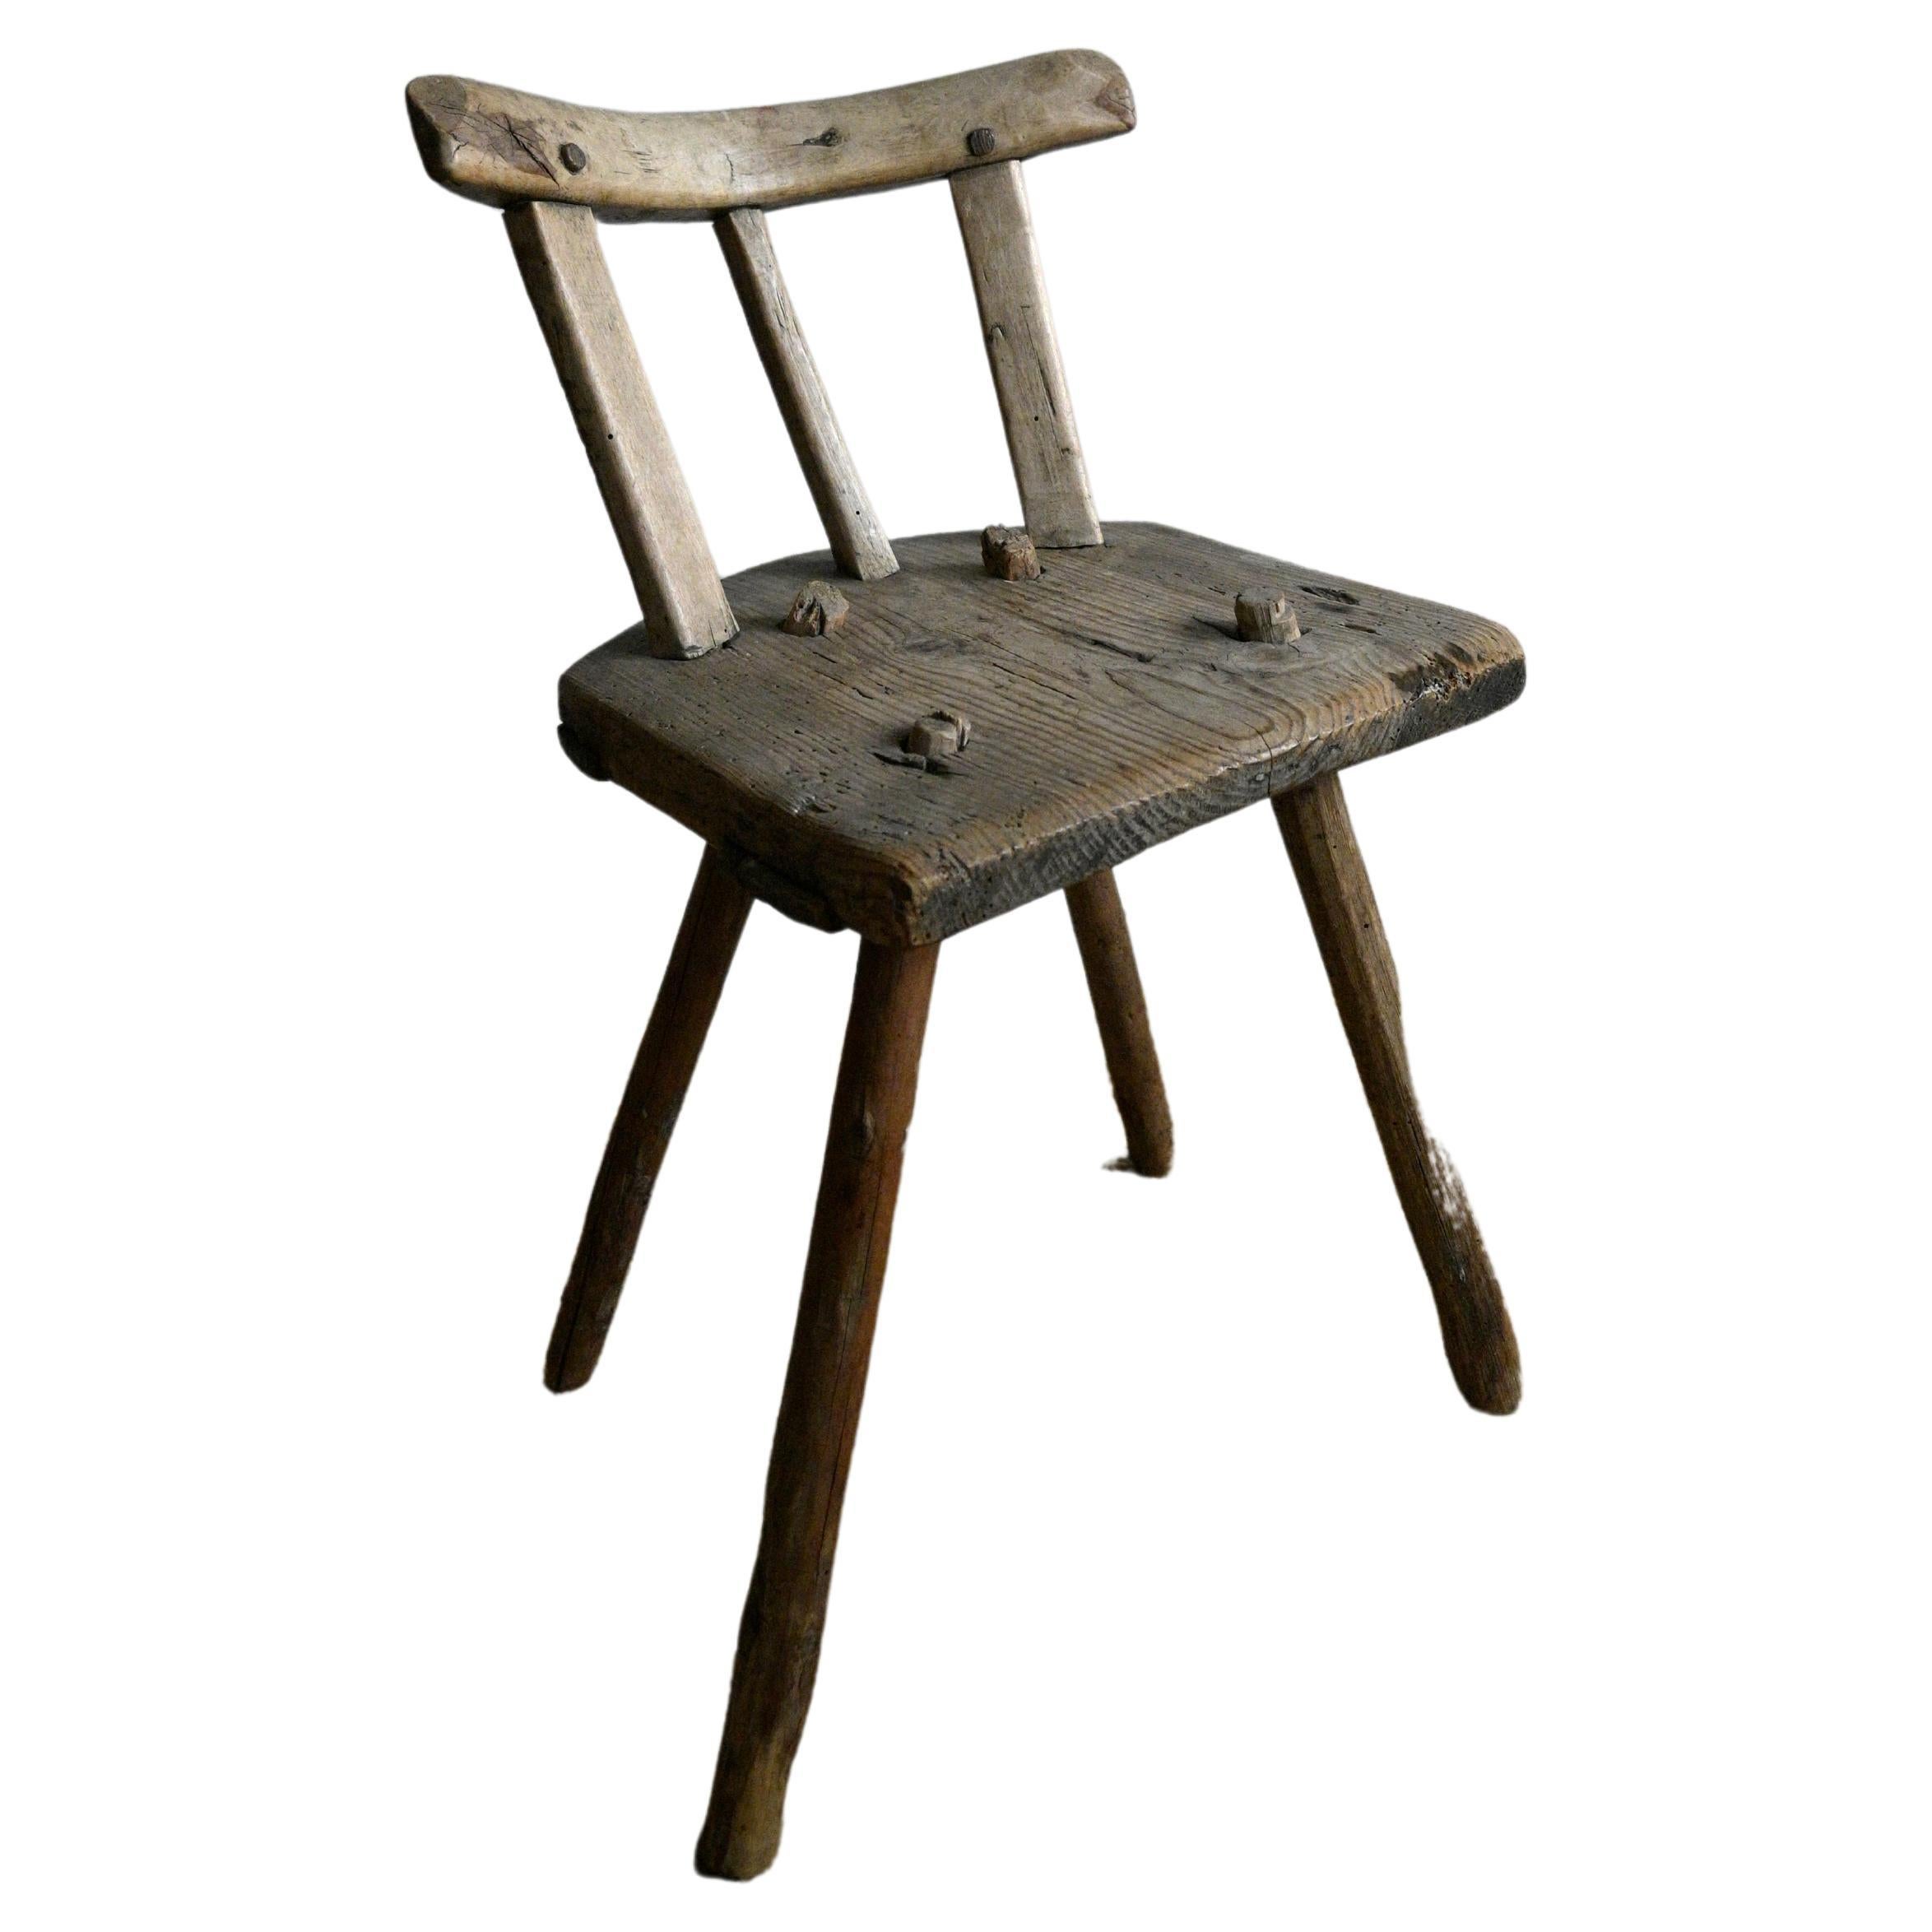 Primitive Swedish Child Stool early-18th century For Sale